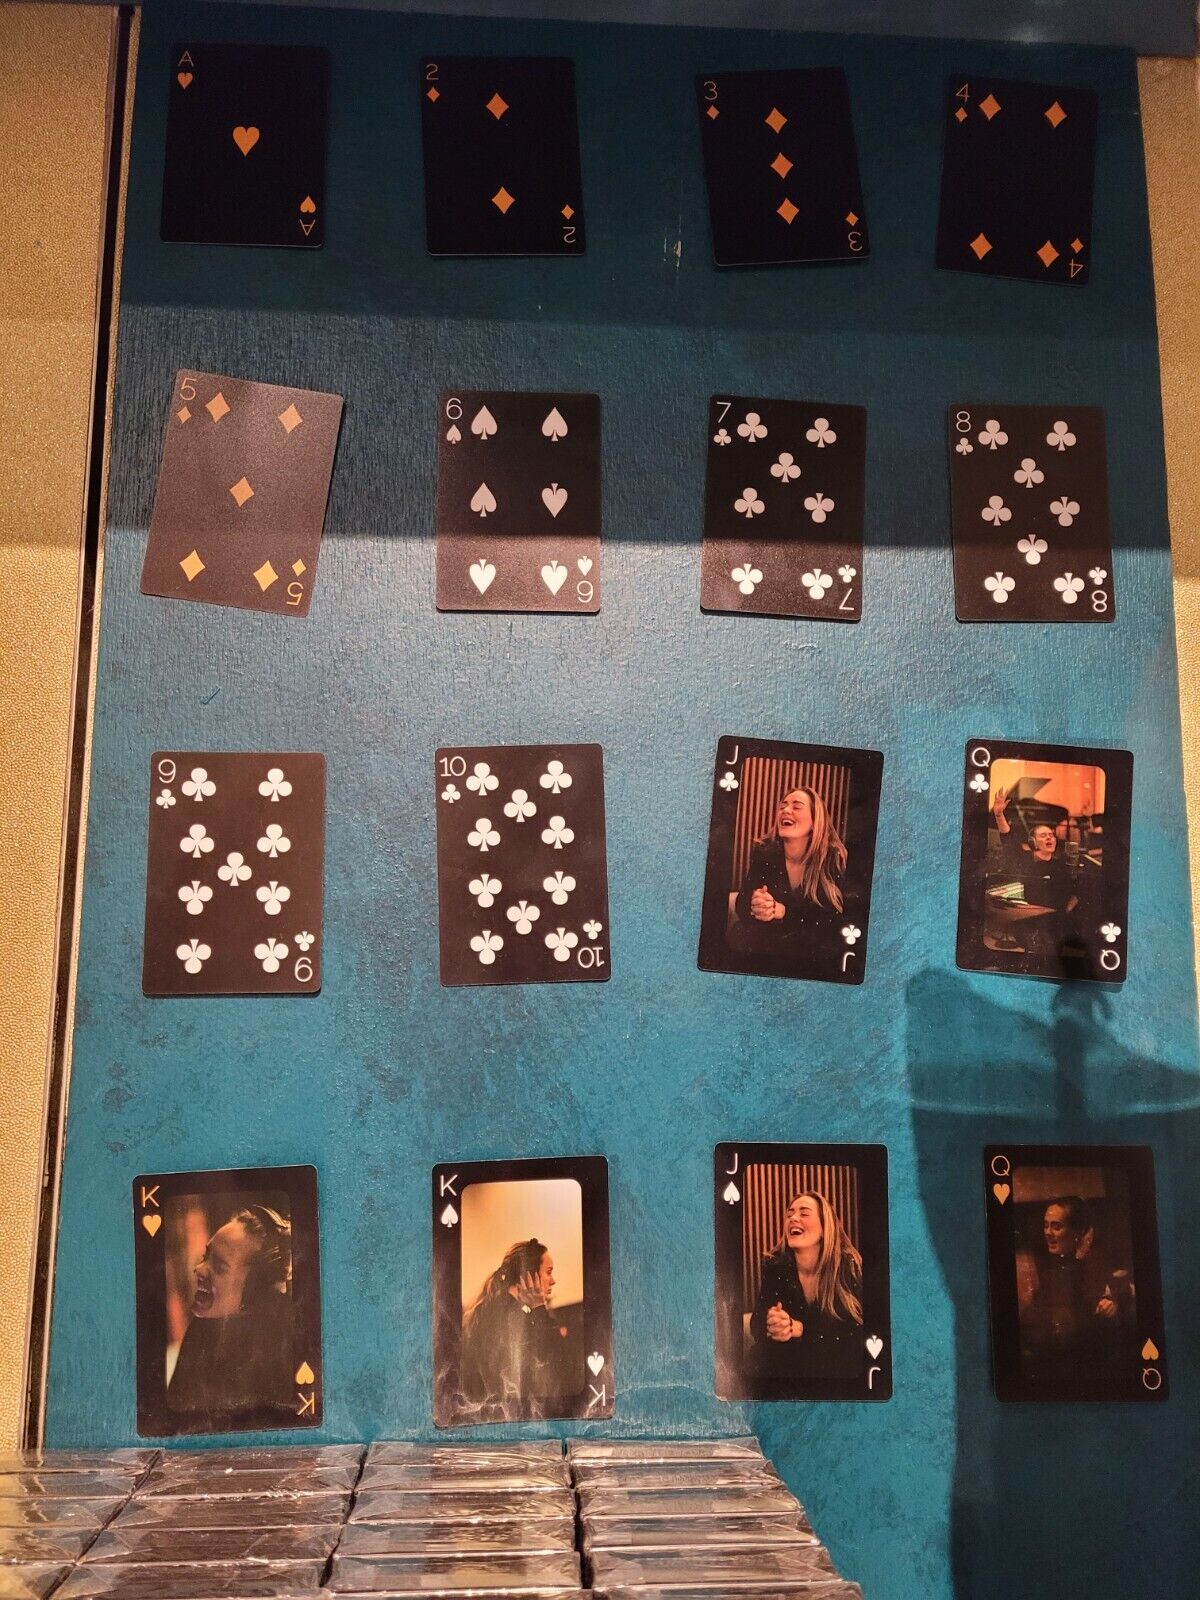 NEW Adele “Weekends With Adele” Vegas Residency 52 Playing Cards Deck Photos